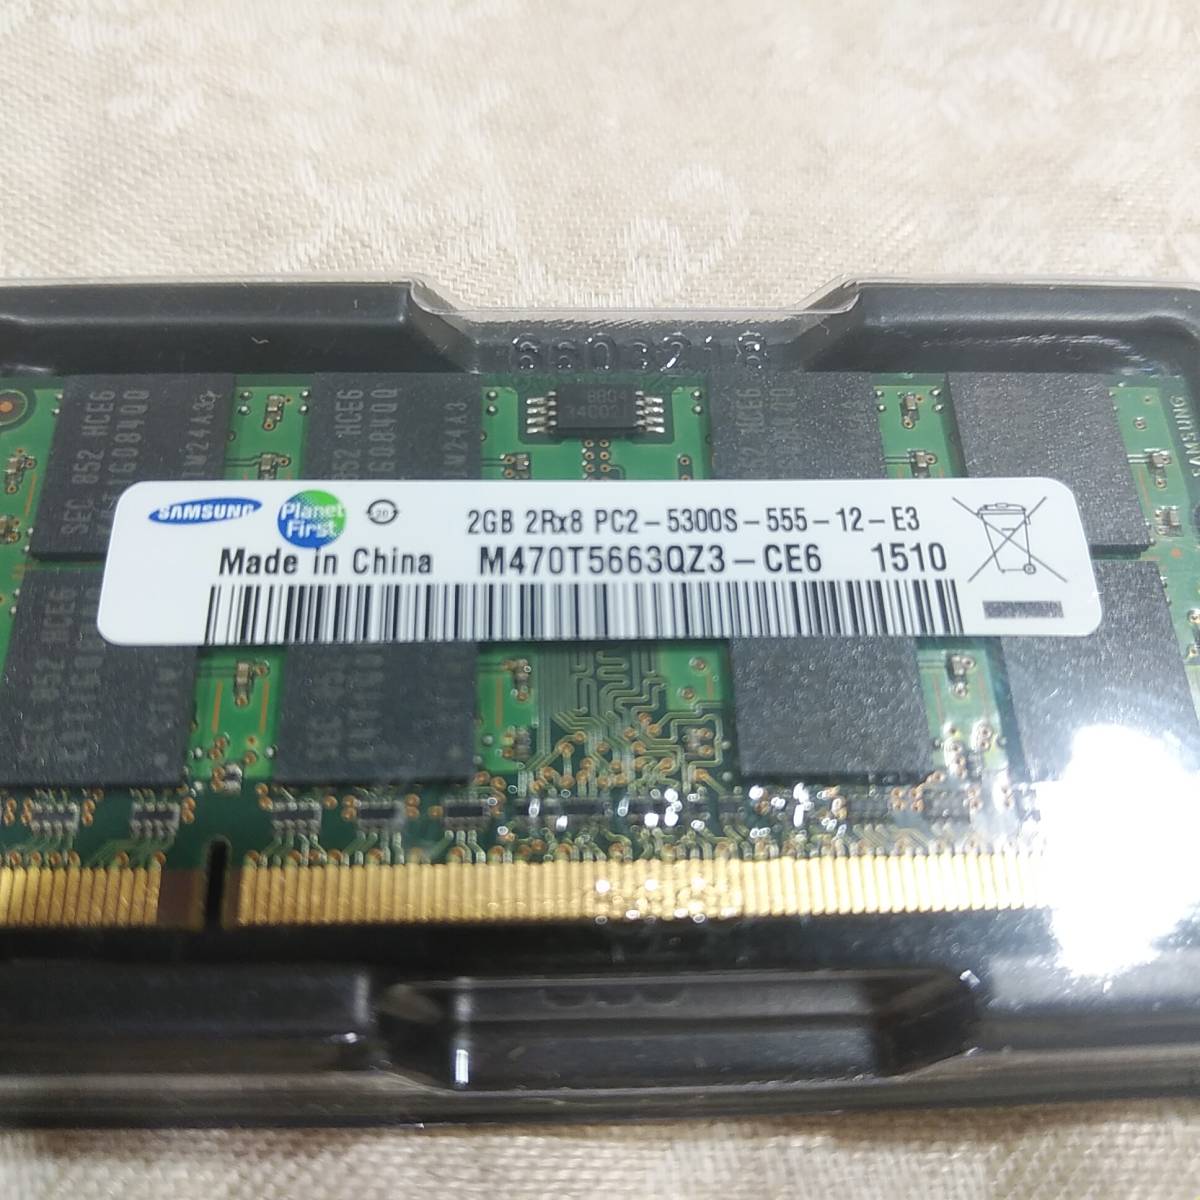  new goods SANSUNG Samsung Note PC for memory PC2-5300S DDR2-667MHz 2GB×1 sheets CL6 SO-DIMM free shipping 